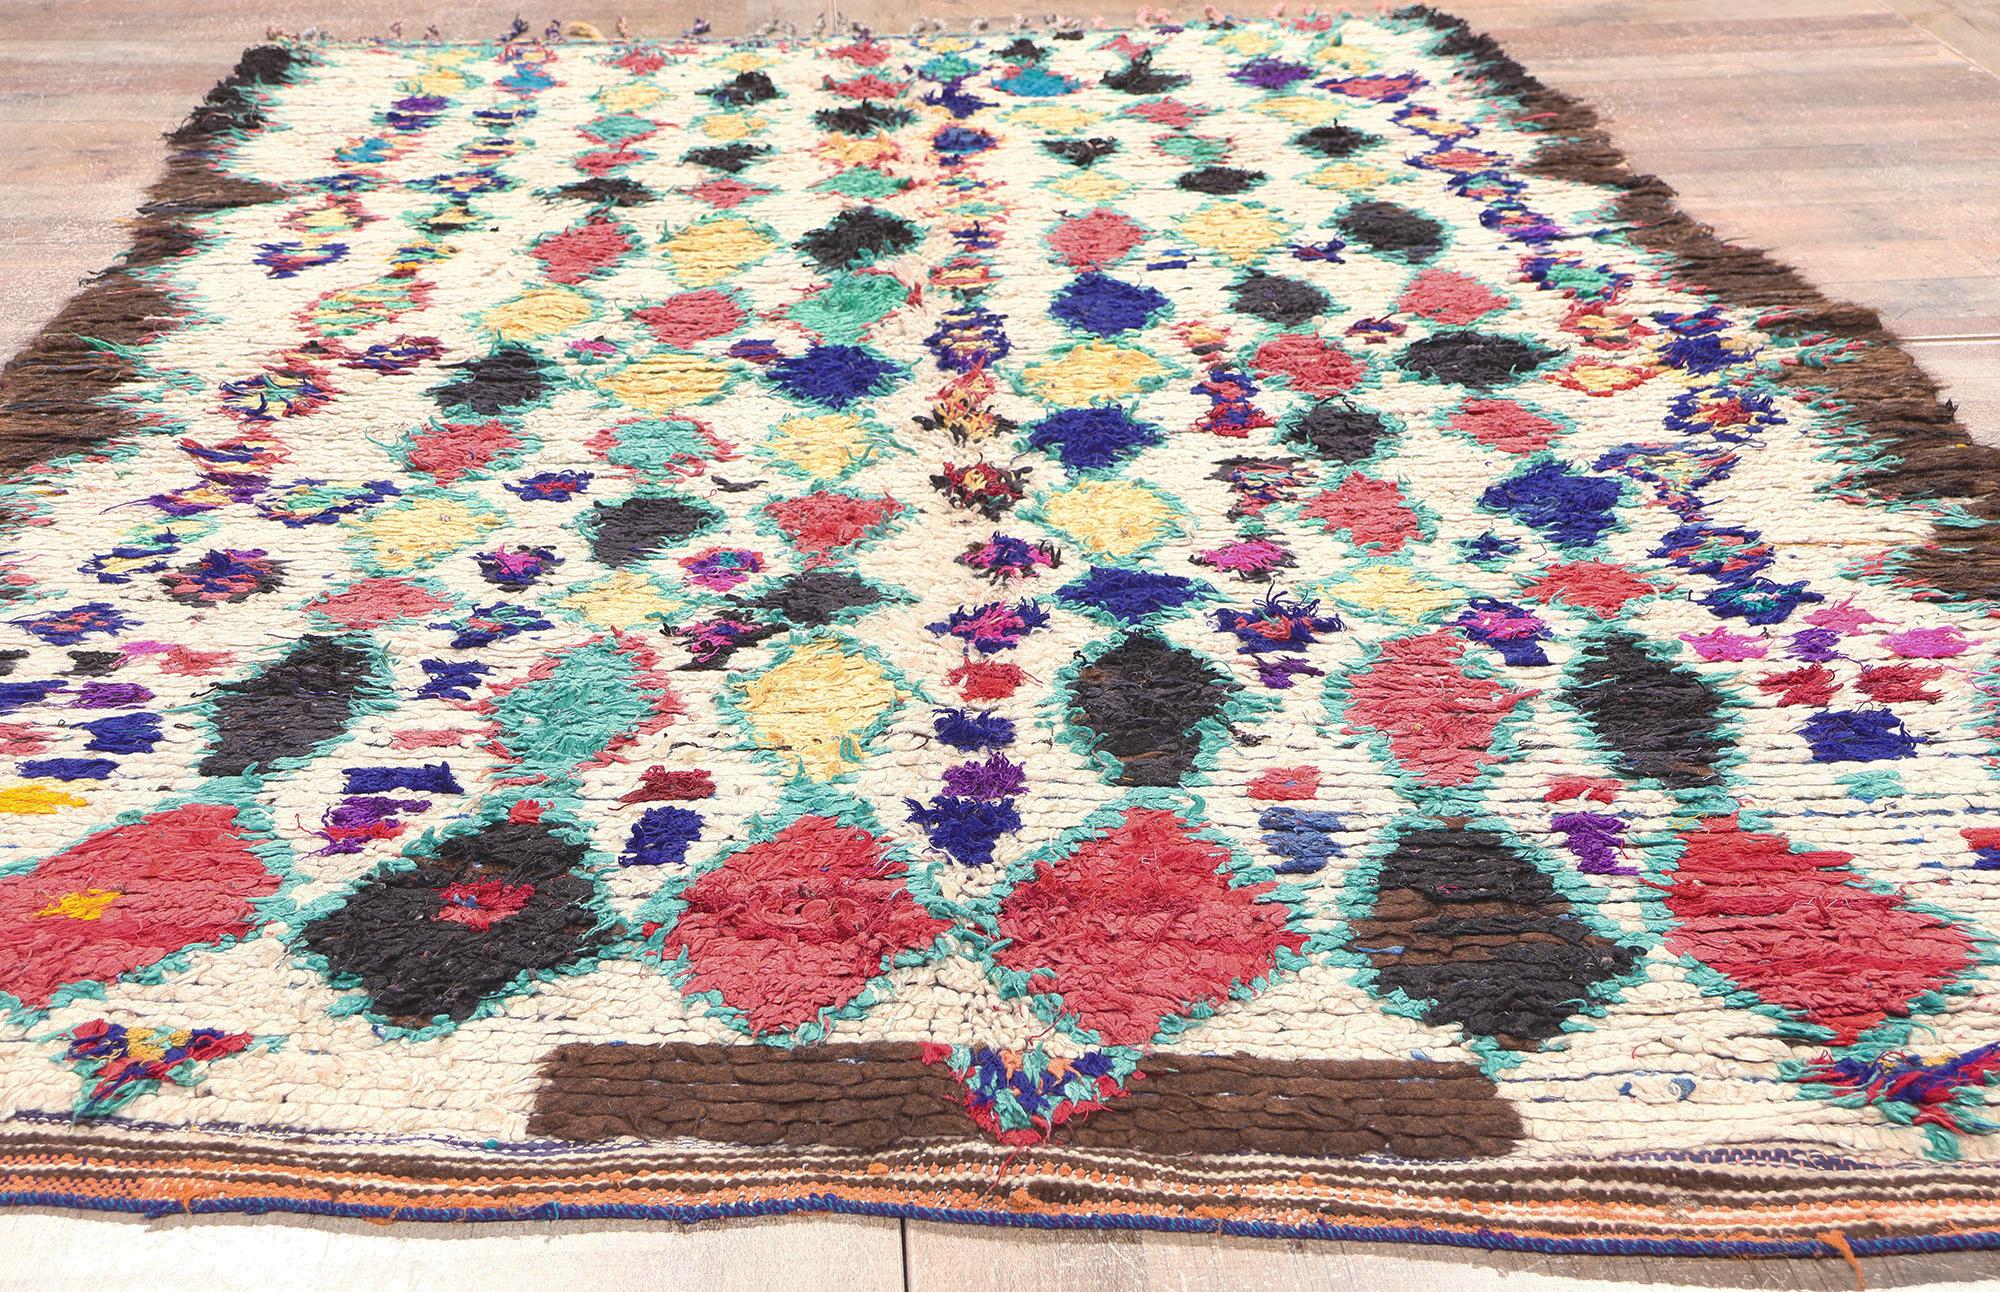 Vintage Boucherouite Moroccan Azilal Rag Rug by Berber Tribes of Morocco For Sale 1